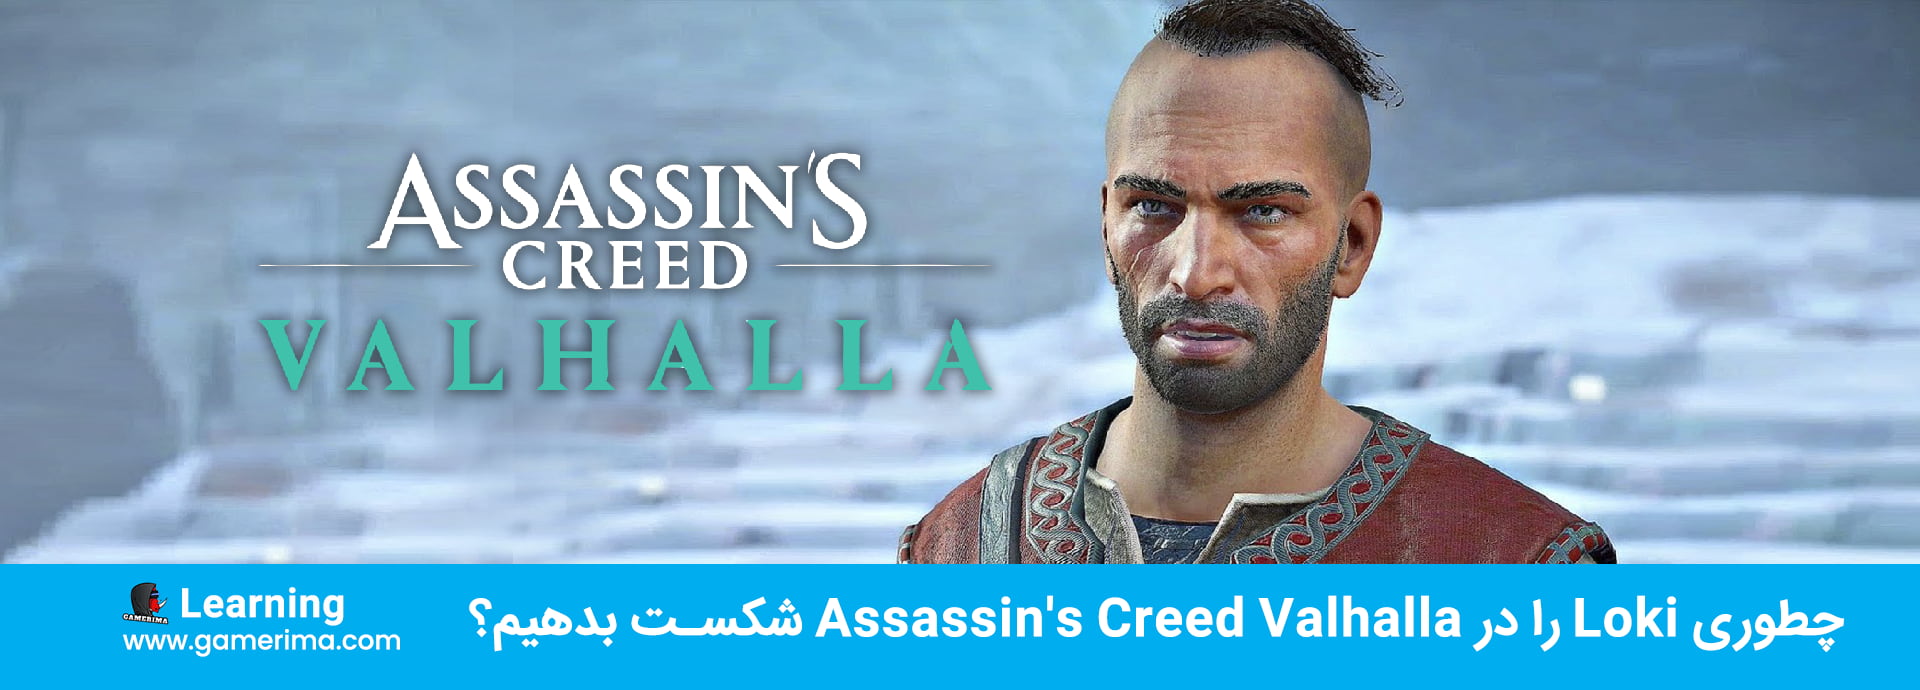 How To Defeat Loki In Assassins Creed Valhalla